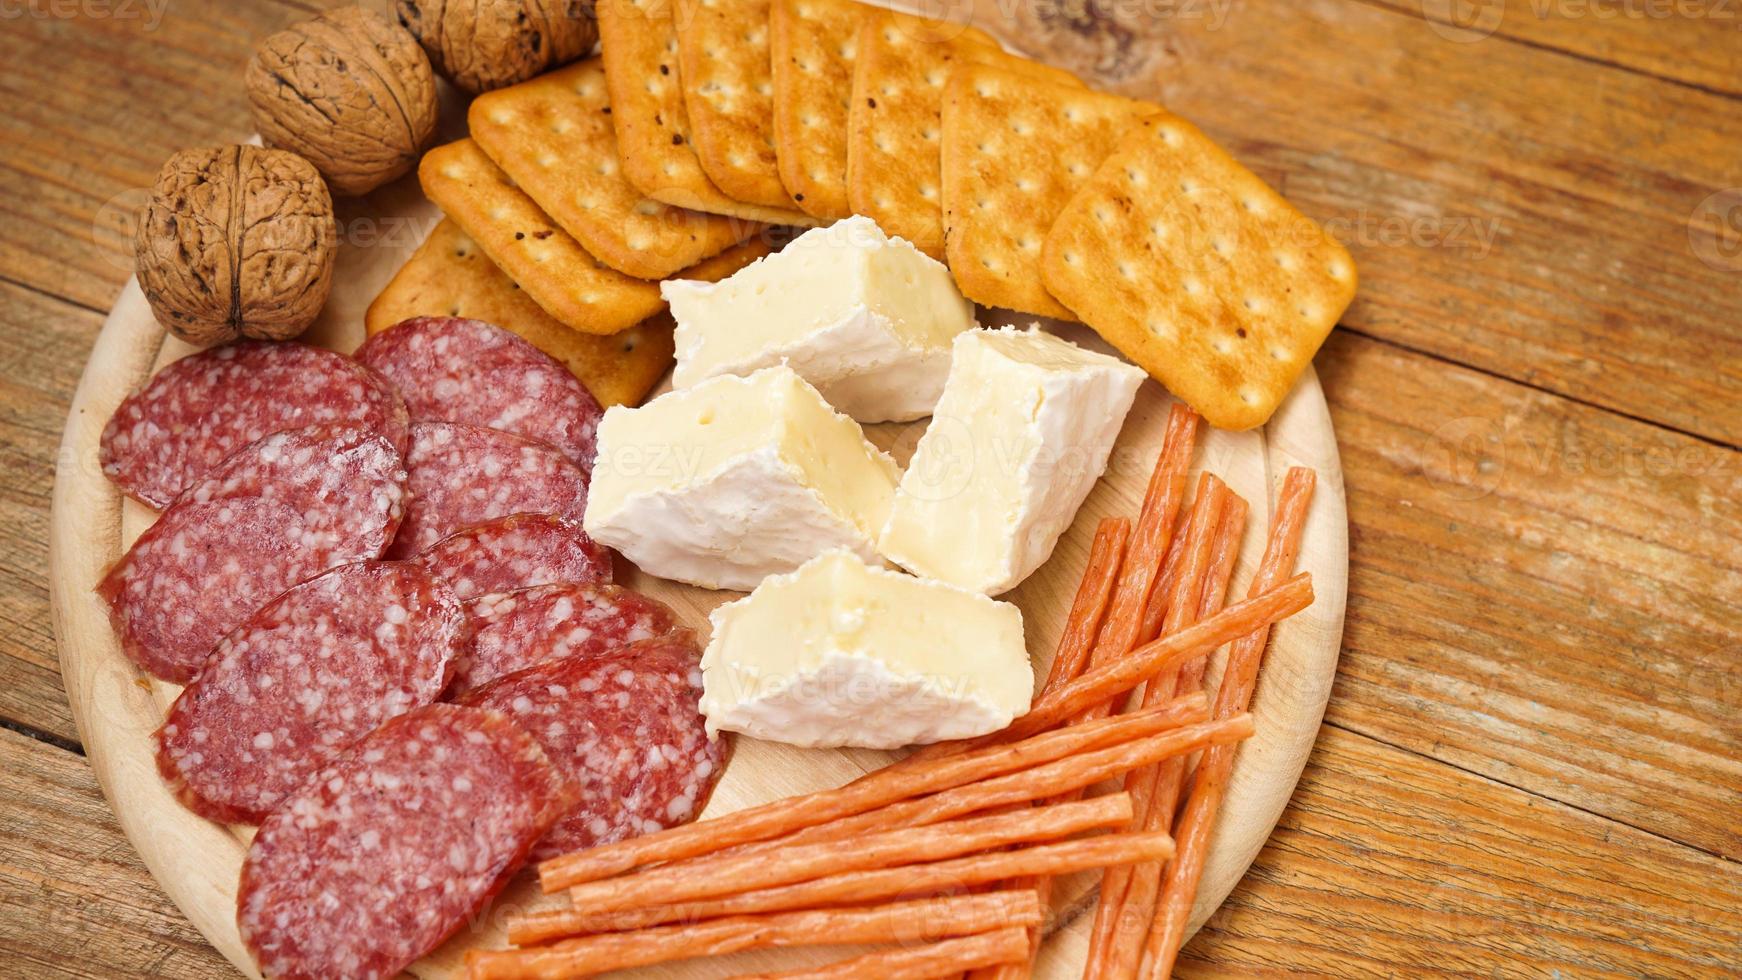 Meat and cheese plate for appetizers. Sausage, cheeses, crackers, nuts on wooden photo